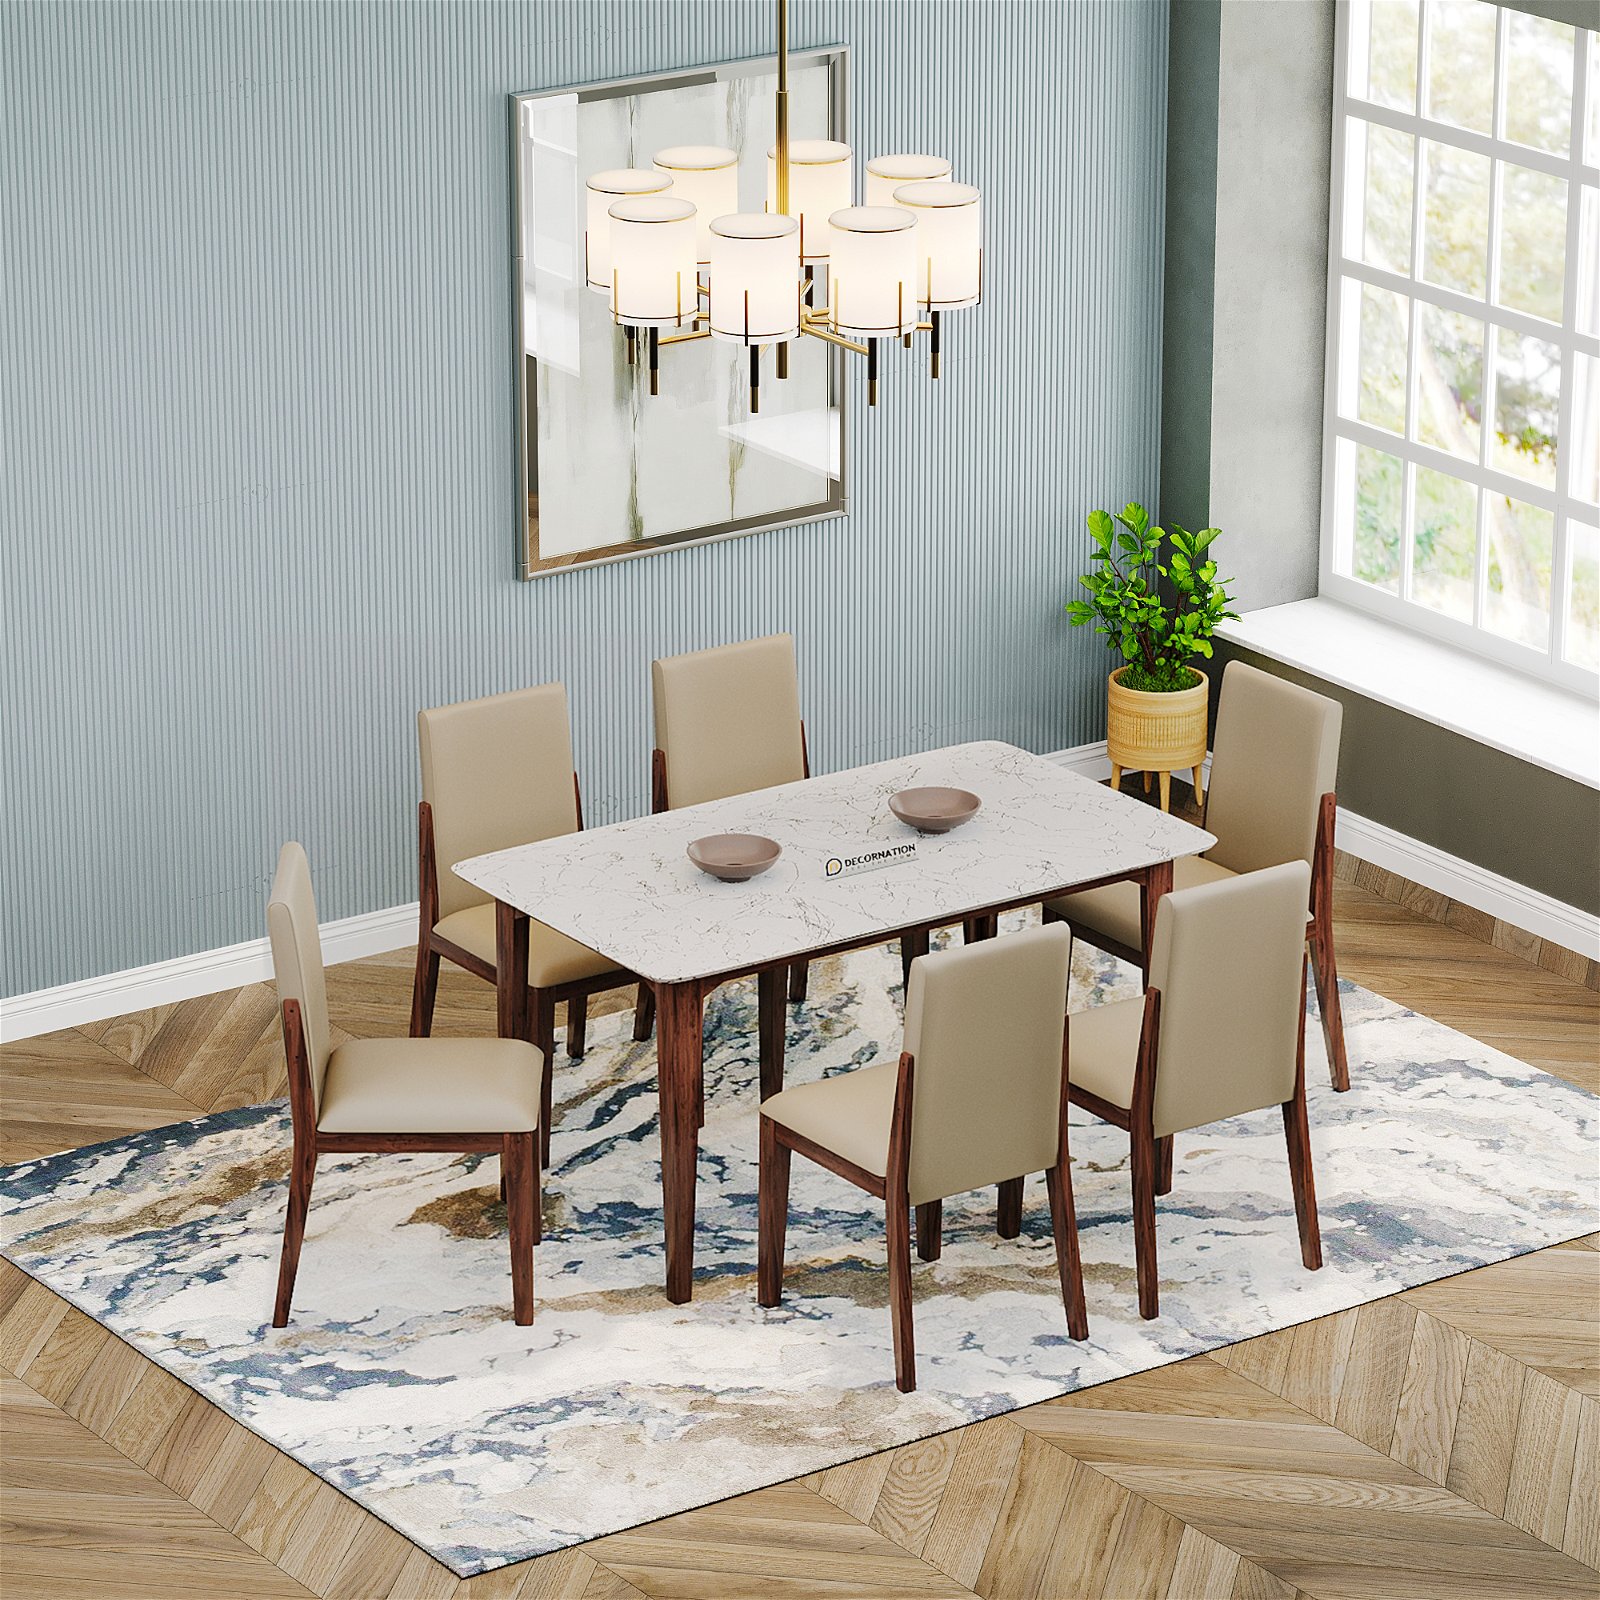 Italiana Dining Table with Chairs – White